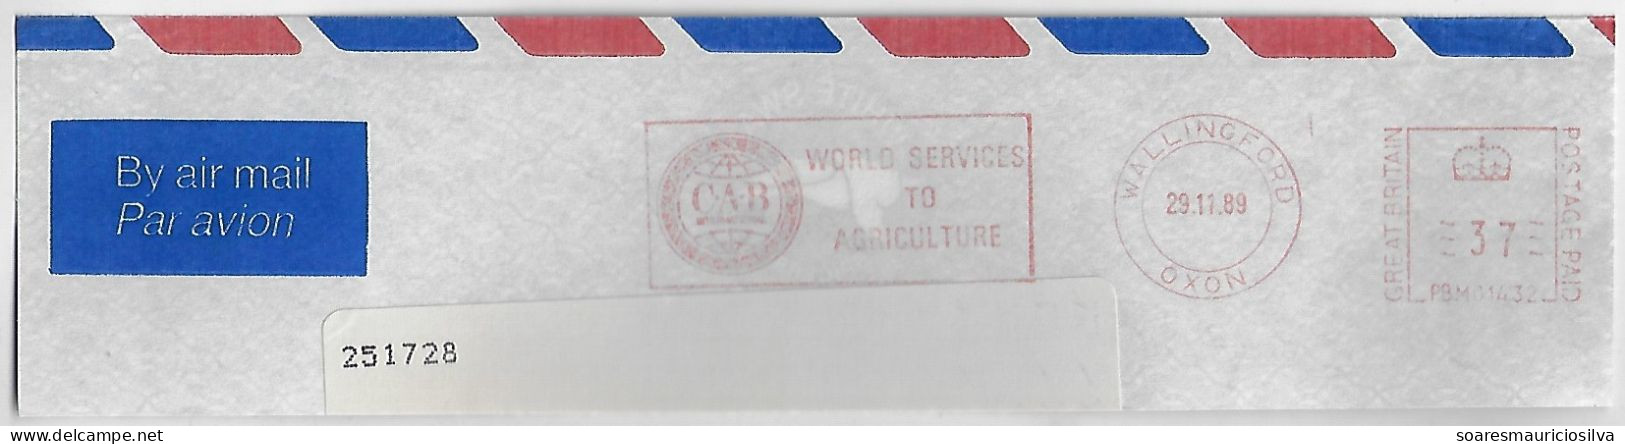 Great Britain 1989 Meter Stamp Pitney Bowes 5000 Slogan CAB International World Services To Agriculture Wallingford - Cartas & Documentos